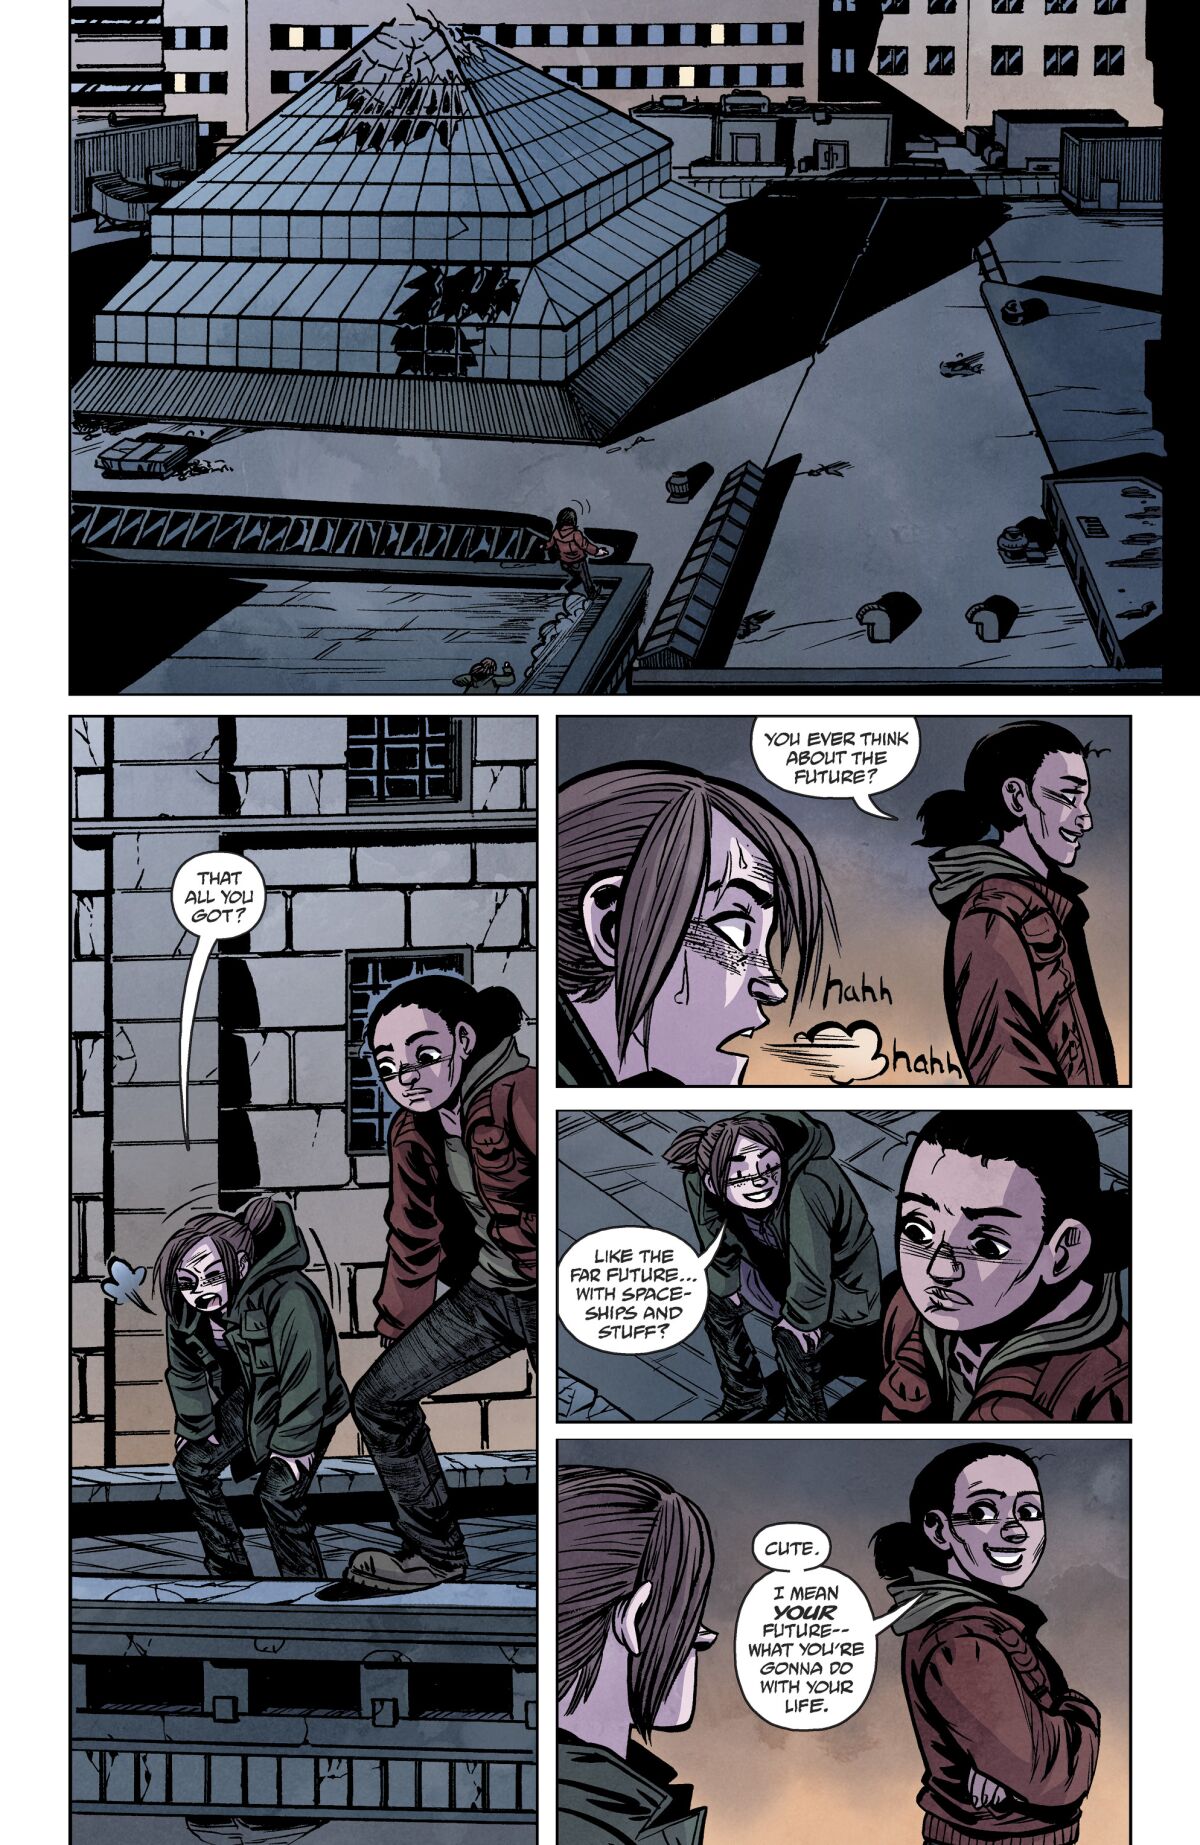 A comic book page showing two girls talking about their future on a rooftop